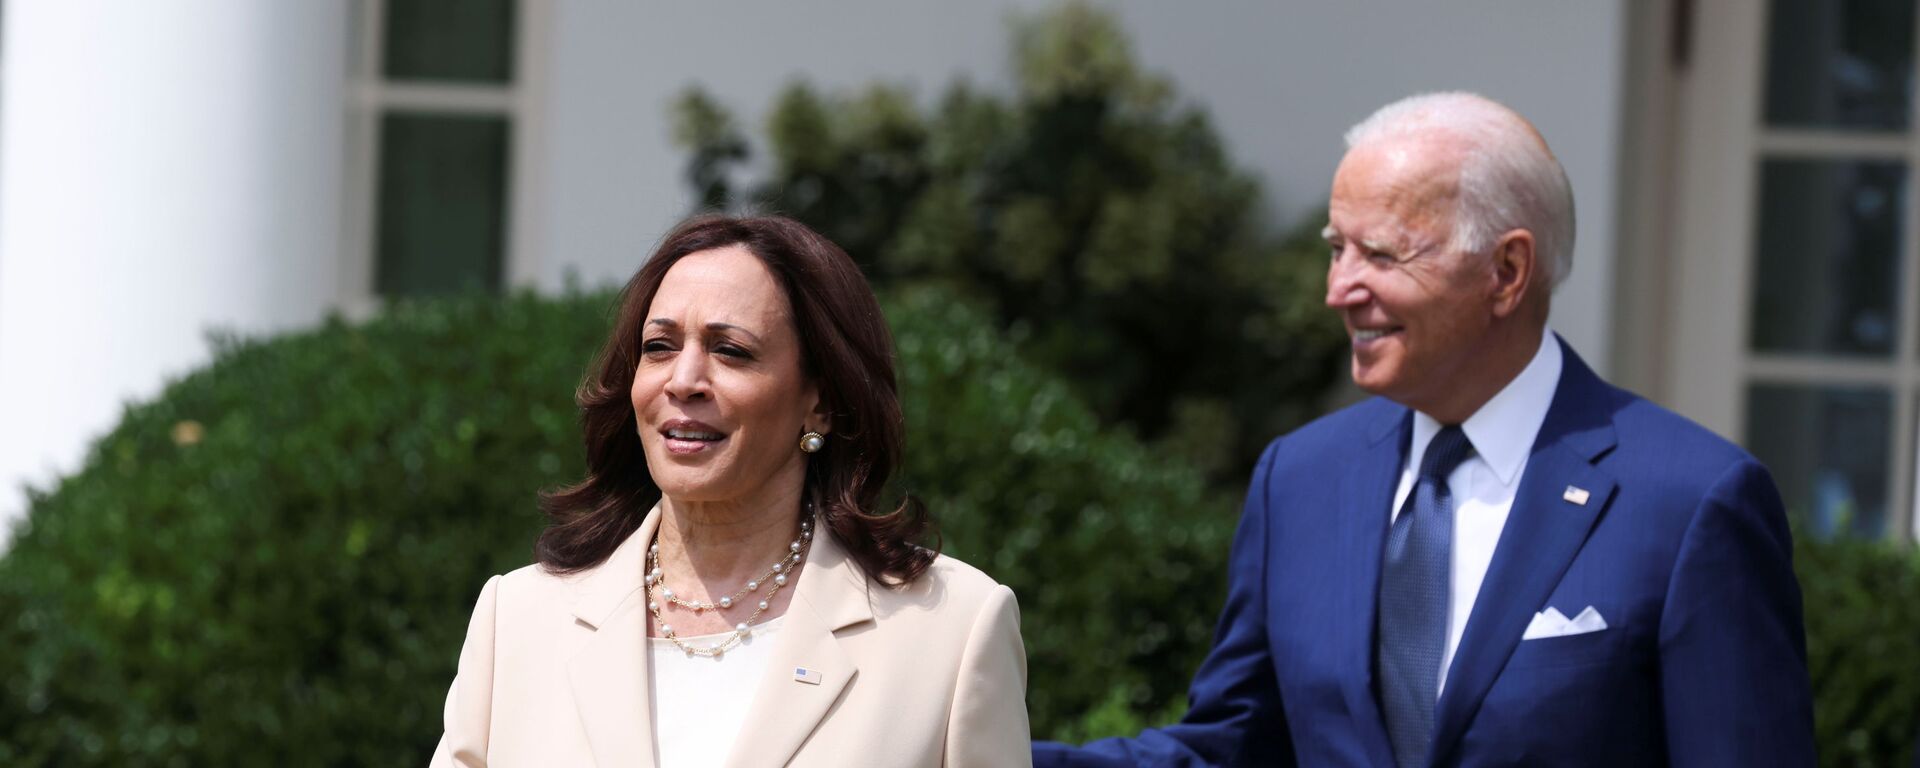 U.S. President Joe Biden and Vice President Kamala Harris arrive for an event to celebrate the 31st anniversary of the Americans with Disabilities Act (ADA) in the White House Rose Garden in Washington, U.S., July 26, 2021 - Sputnik International, 1920, 12.01.2022